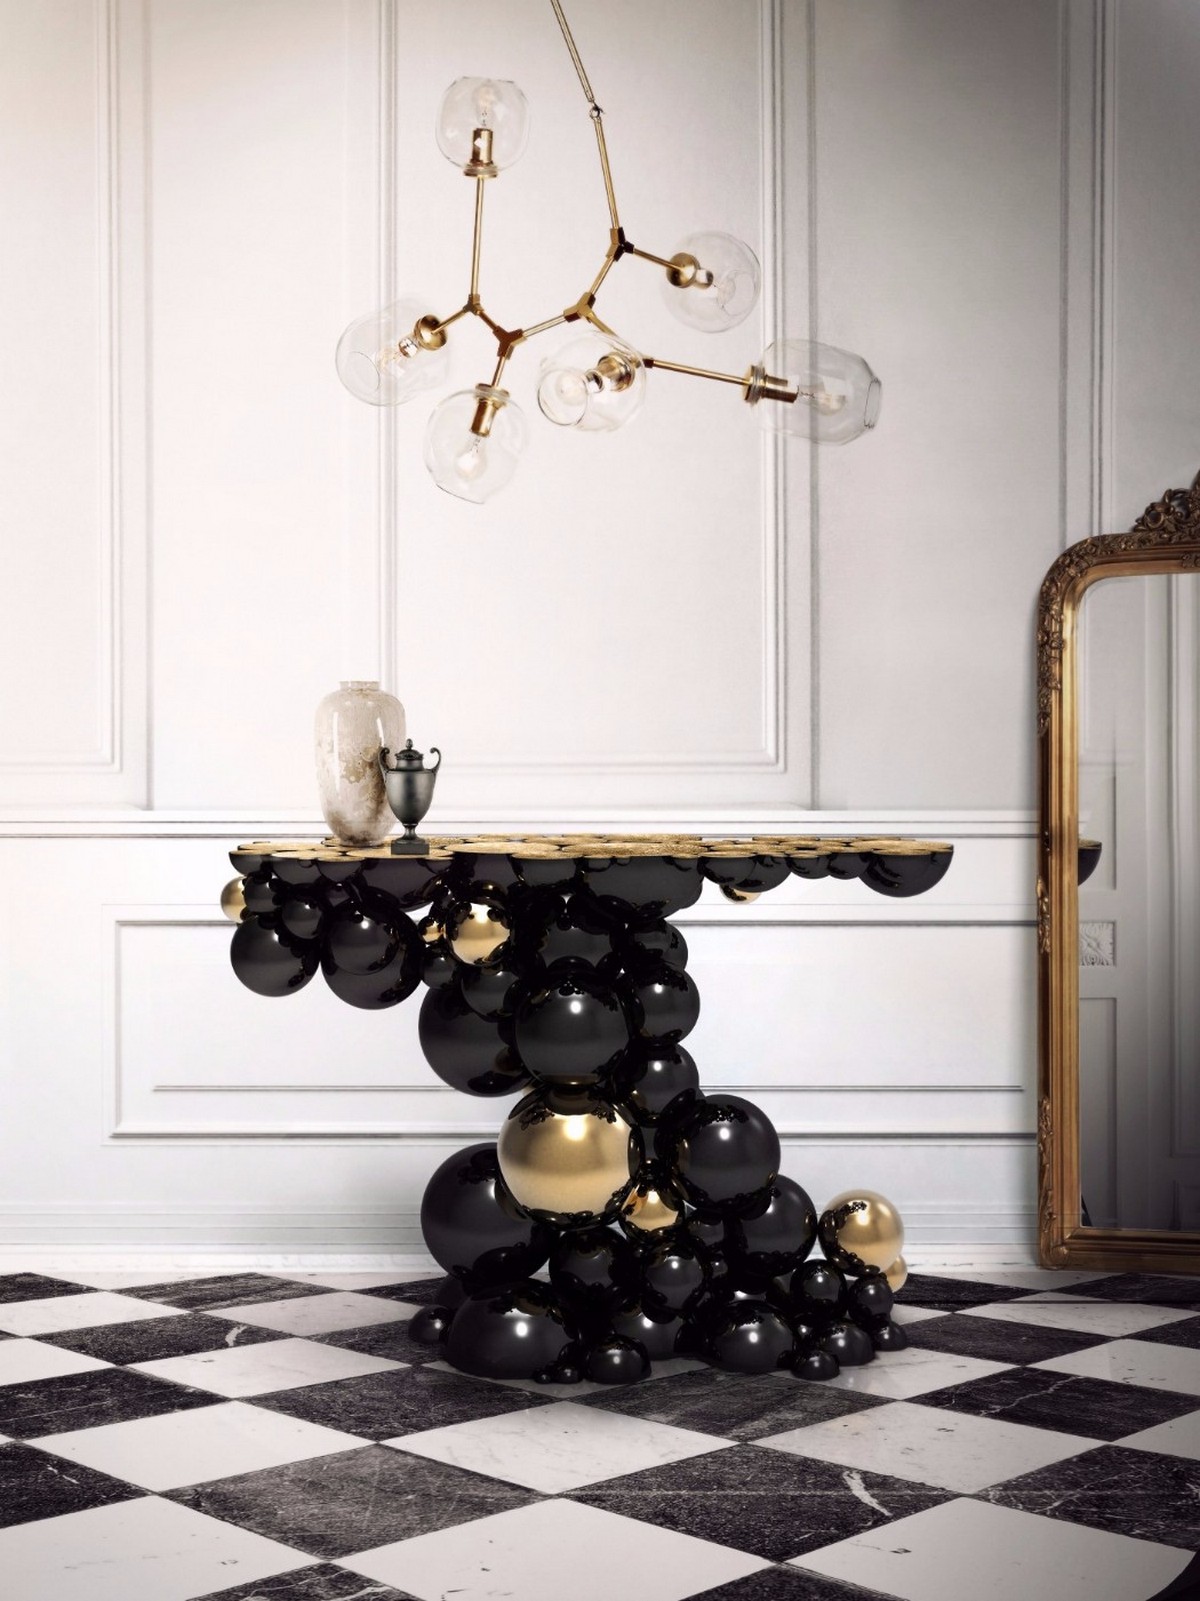 Trendy Console Tables For 2019 (Part II)